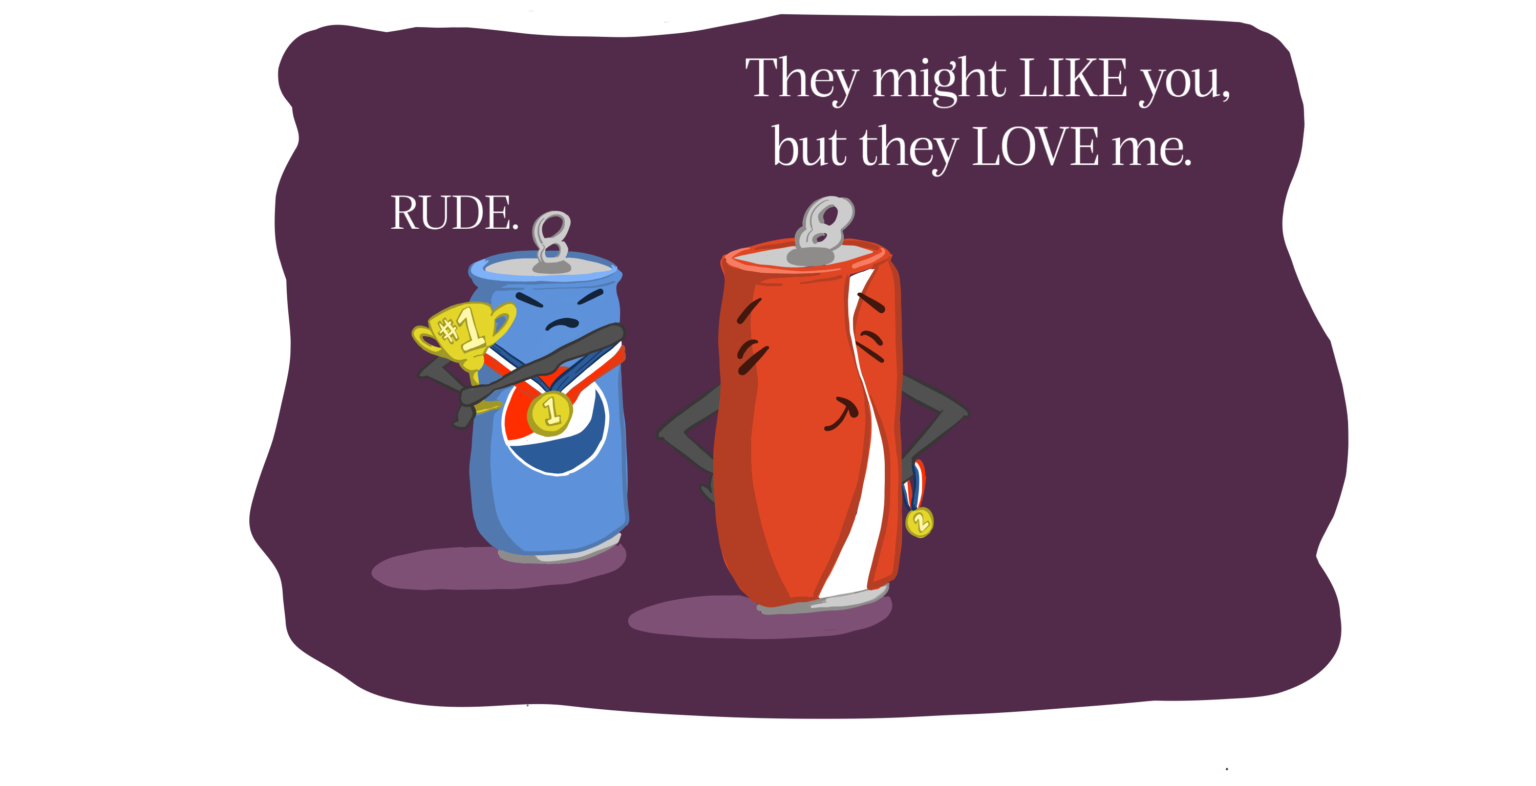 IMAGE OF COKE AND PEPSI BRAND RIVALRY BY ILLUSTRATOR ESS STEHLE